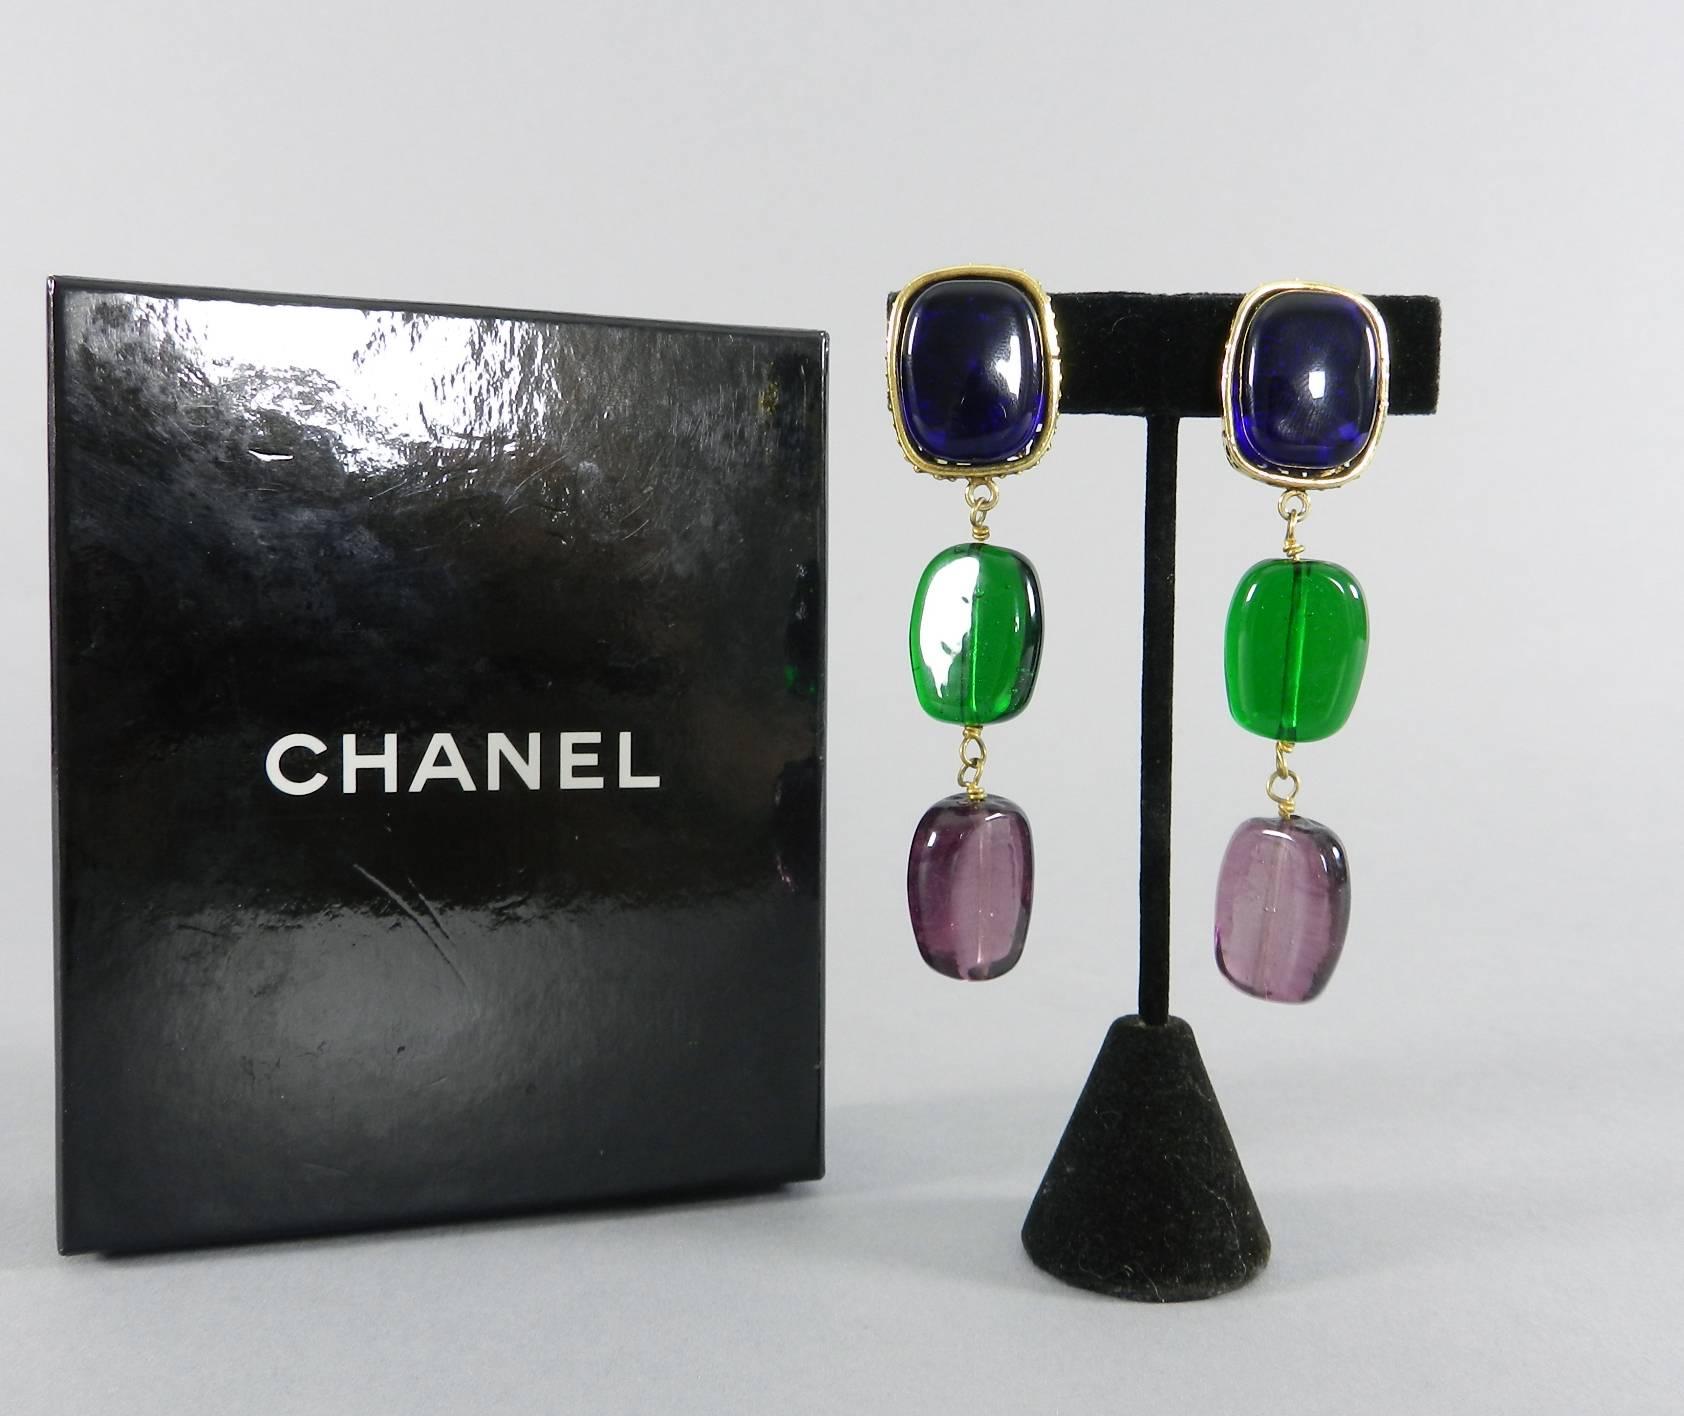 Chanel Vintage 1984 Gripoix Glass Drop Earrings.  Marked season 23 which was the first year that Victoire de Castellane designed jewelry for Chanel. Dark cobalt blue, green, and purple glass beads with gold gilt clips. Measures 3-1/8" long and